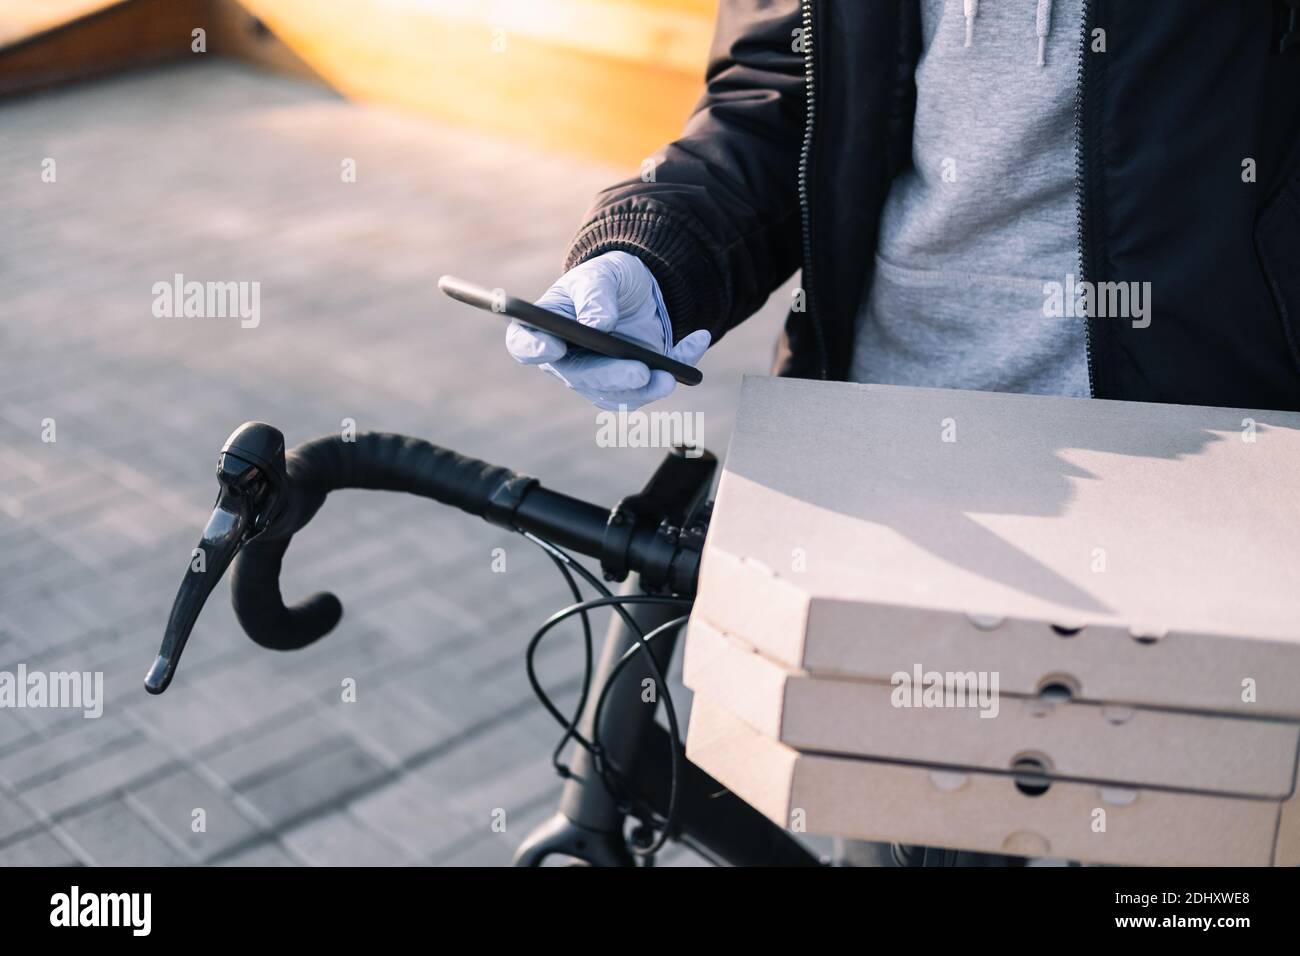 Delivery person standing next to a bicycle holds pizza boxes and a phone. Job as a courier, bike messenger profession, part time work concept Stock Photo